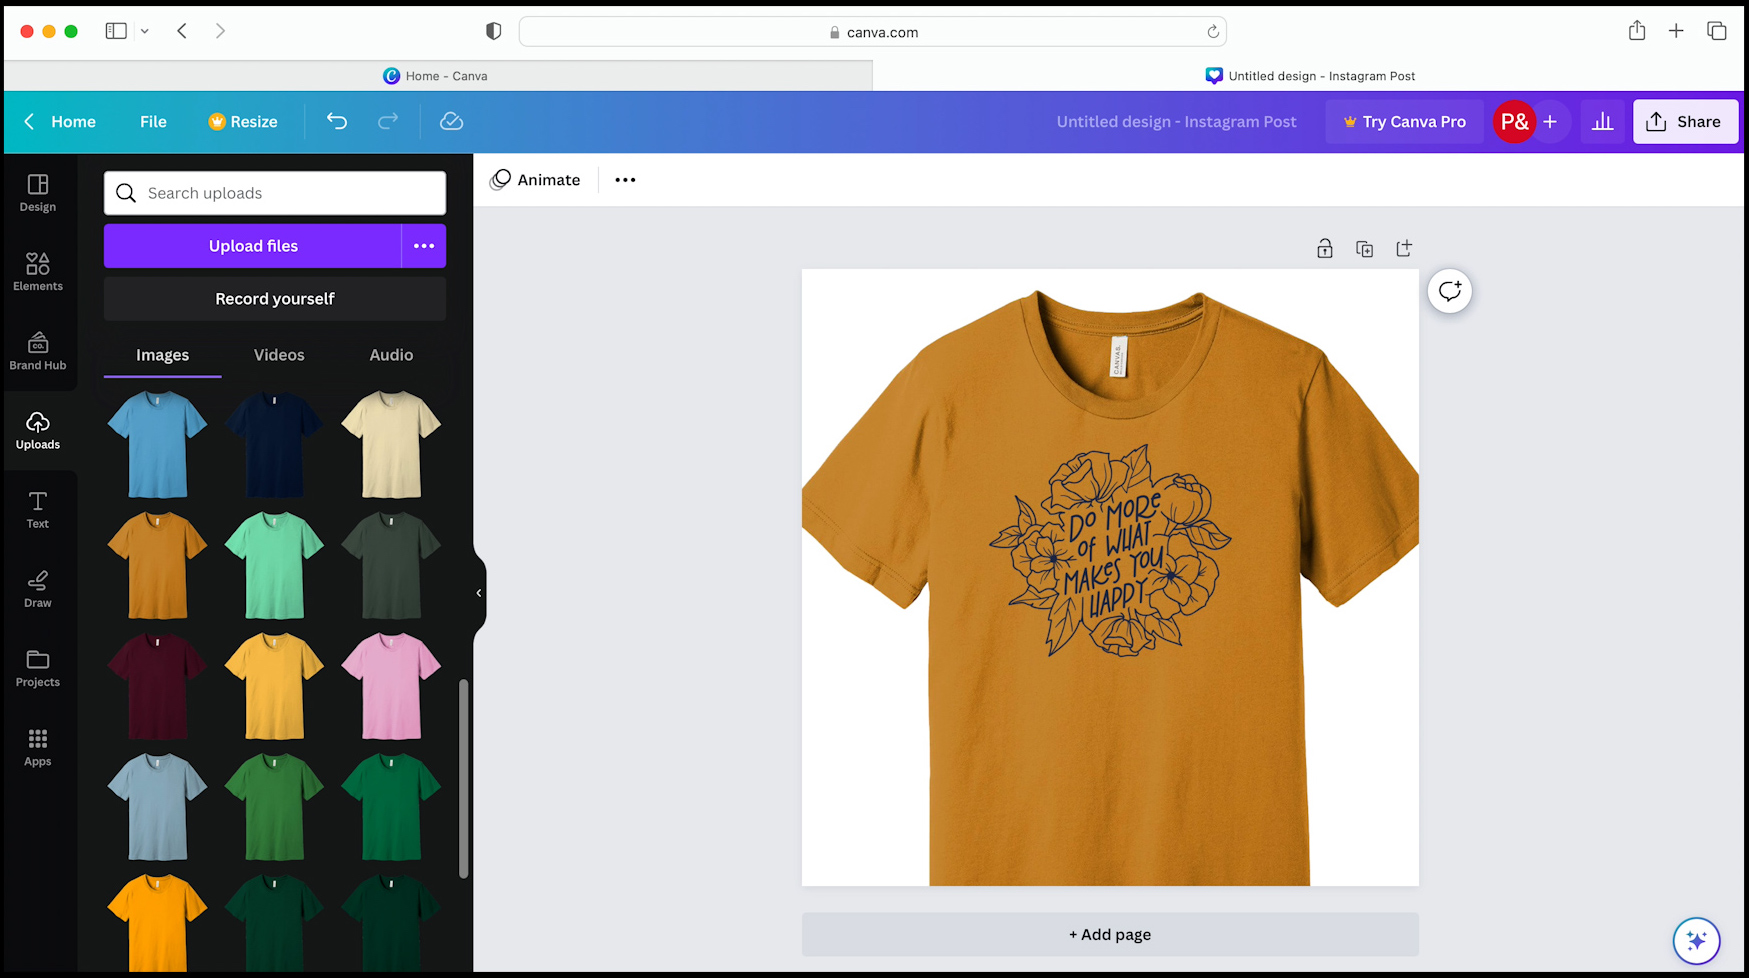 Adding your a design on top of a t-shirt on Canva